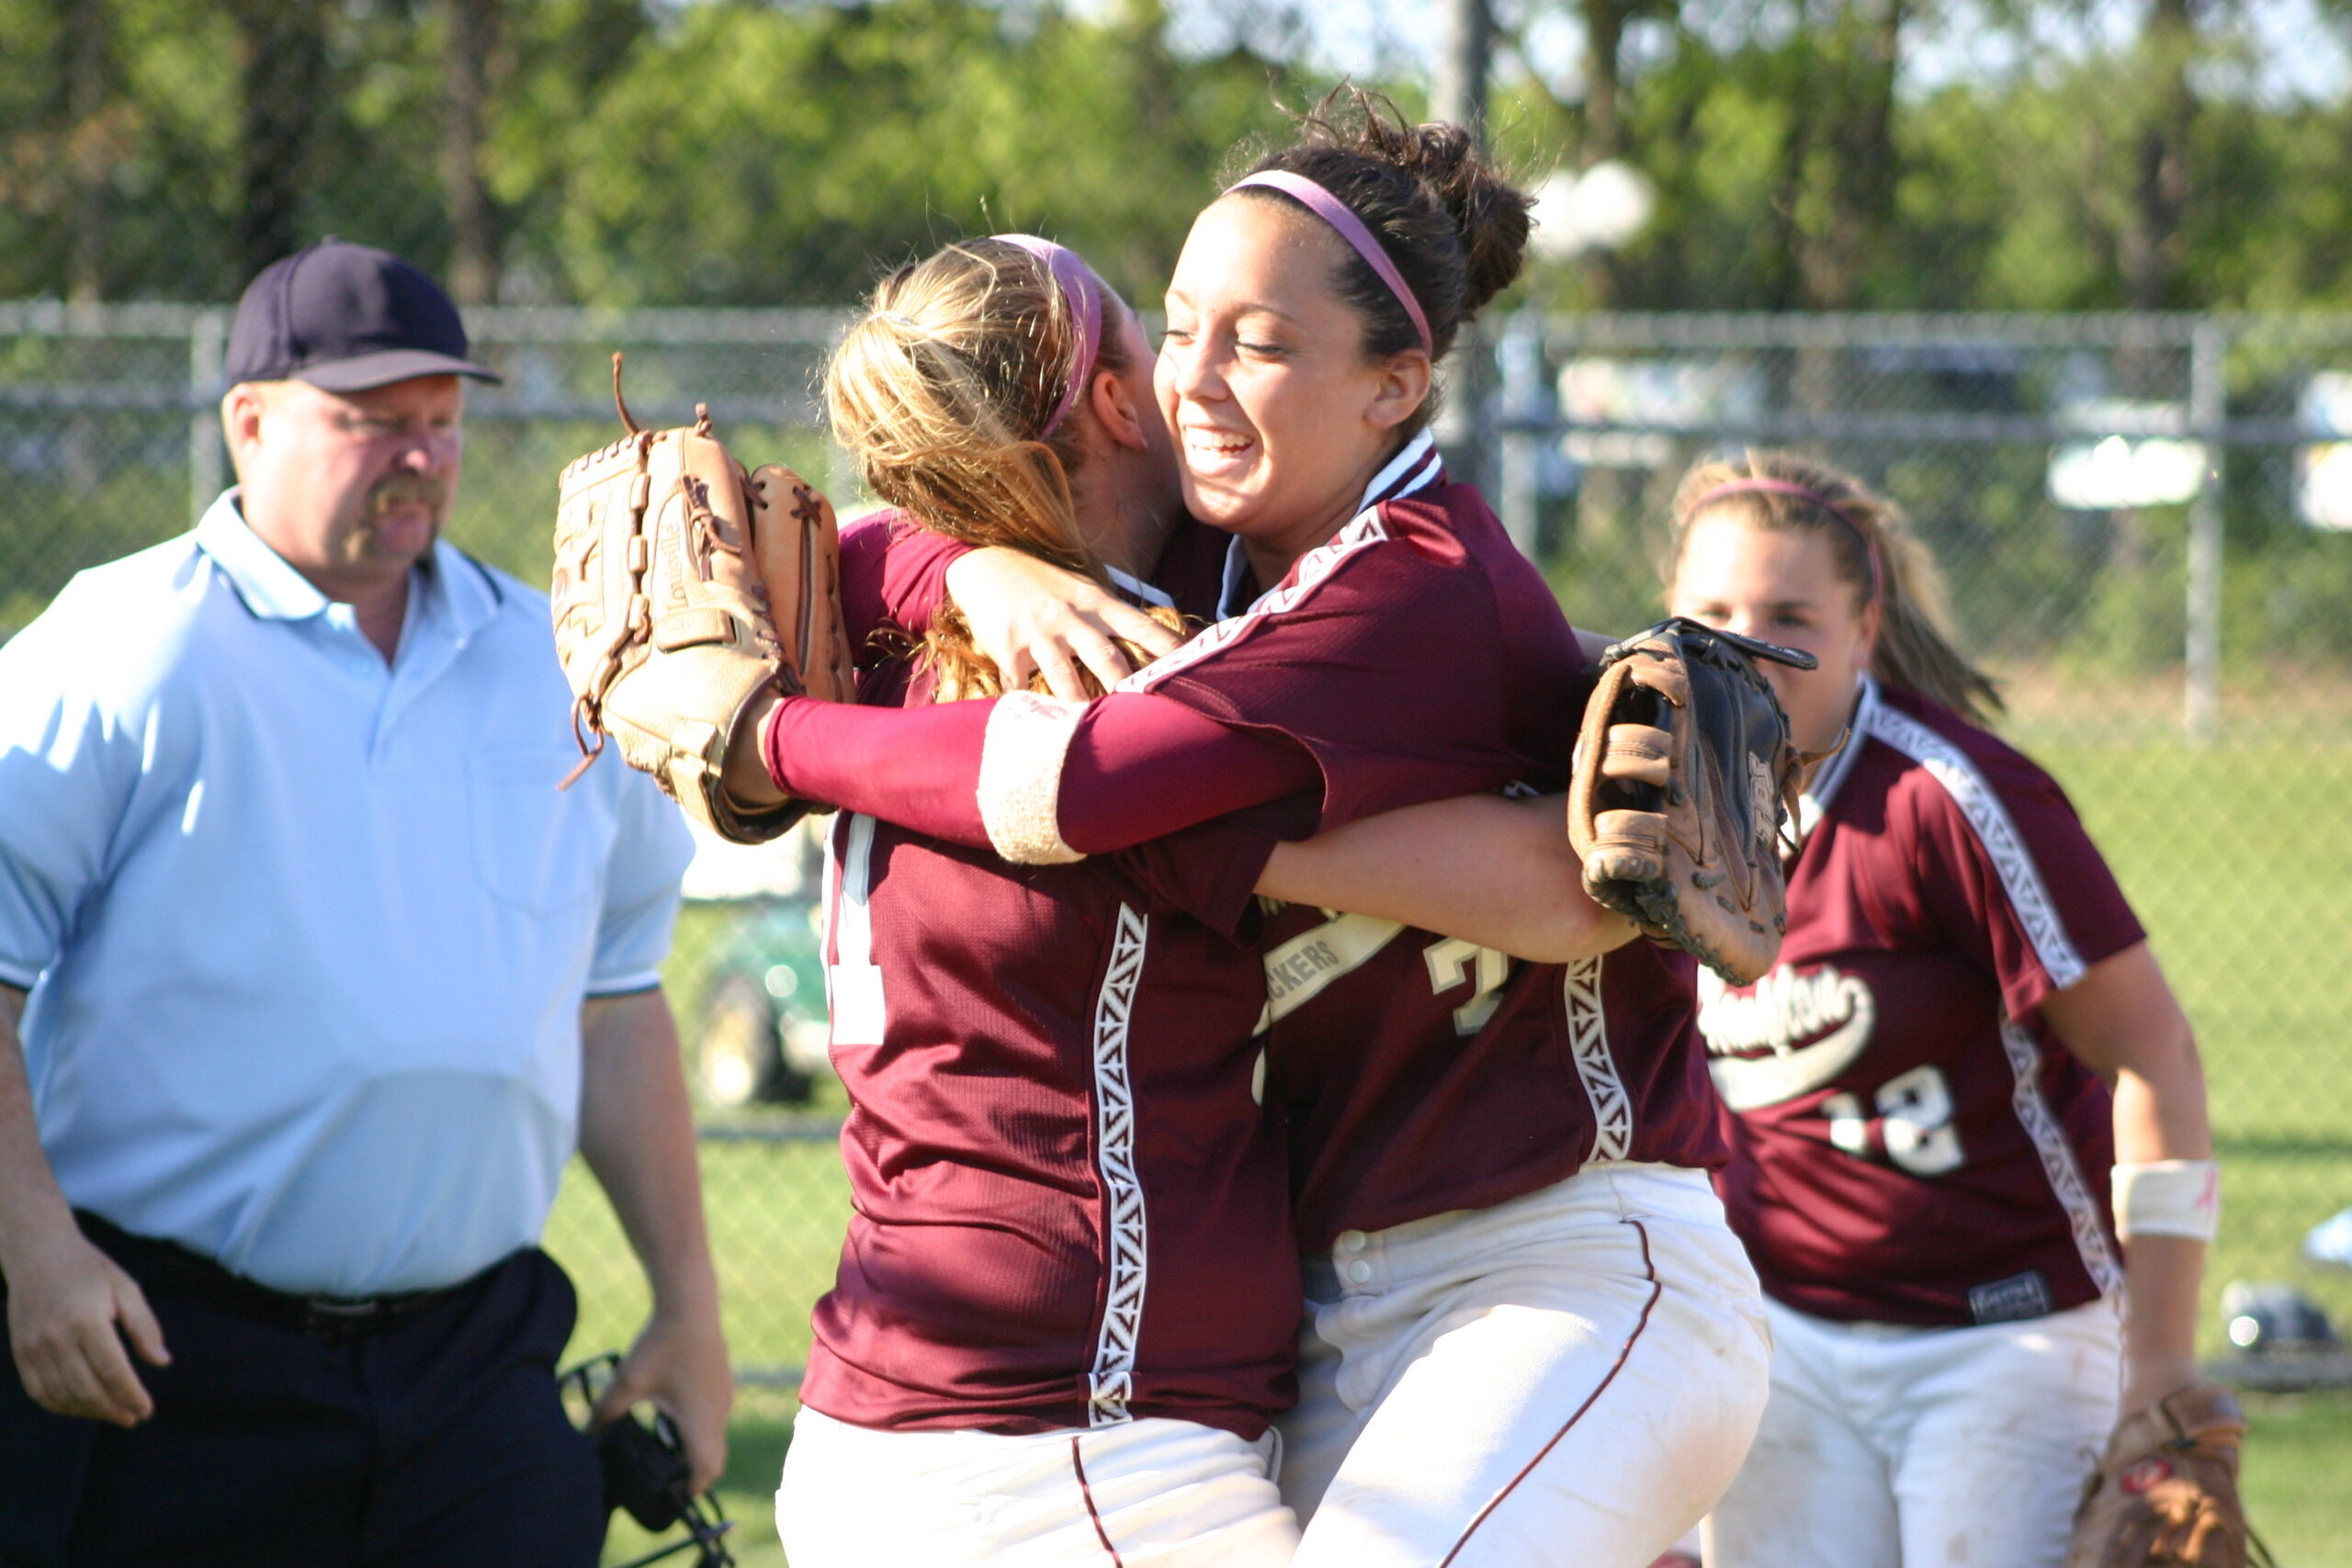 The East Hampton softball team made a run to the state tournament in 2008. EXPRESS ARCHIVES